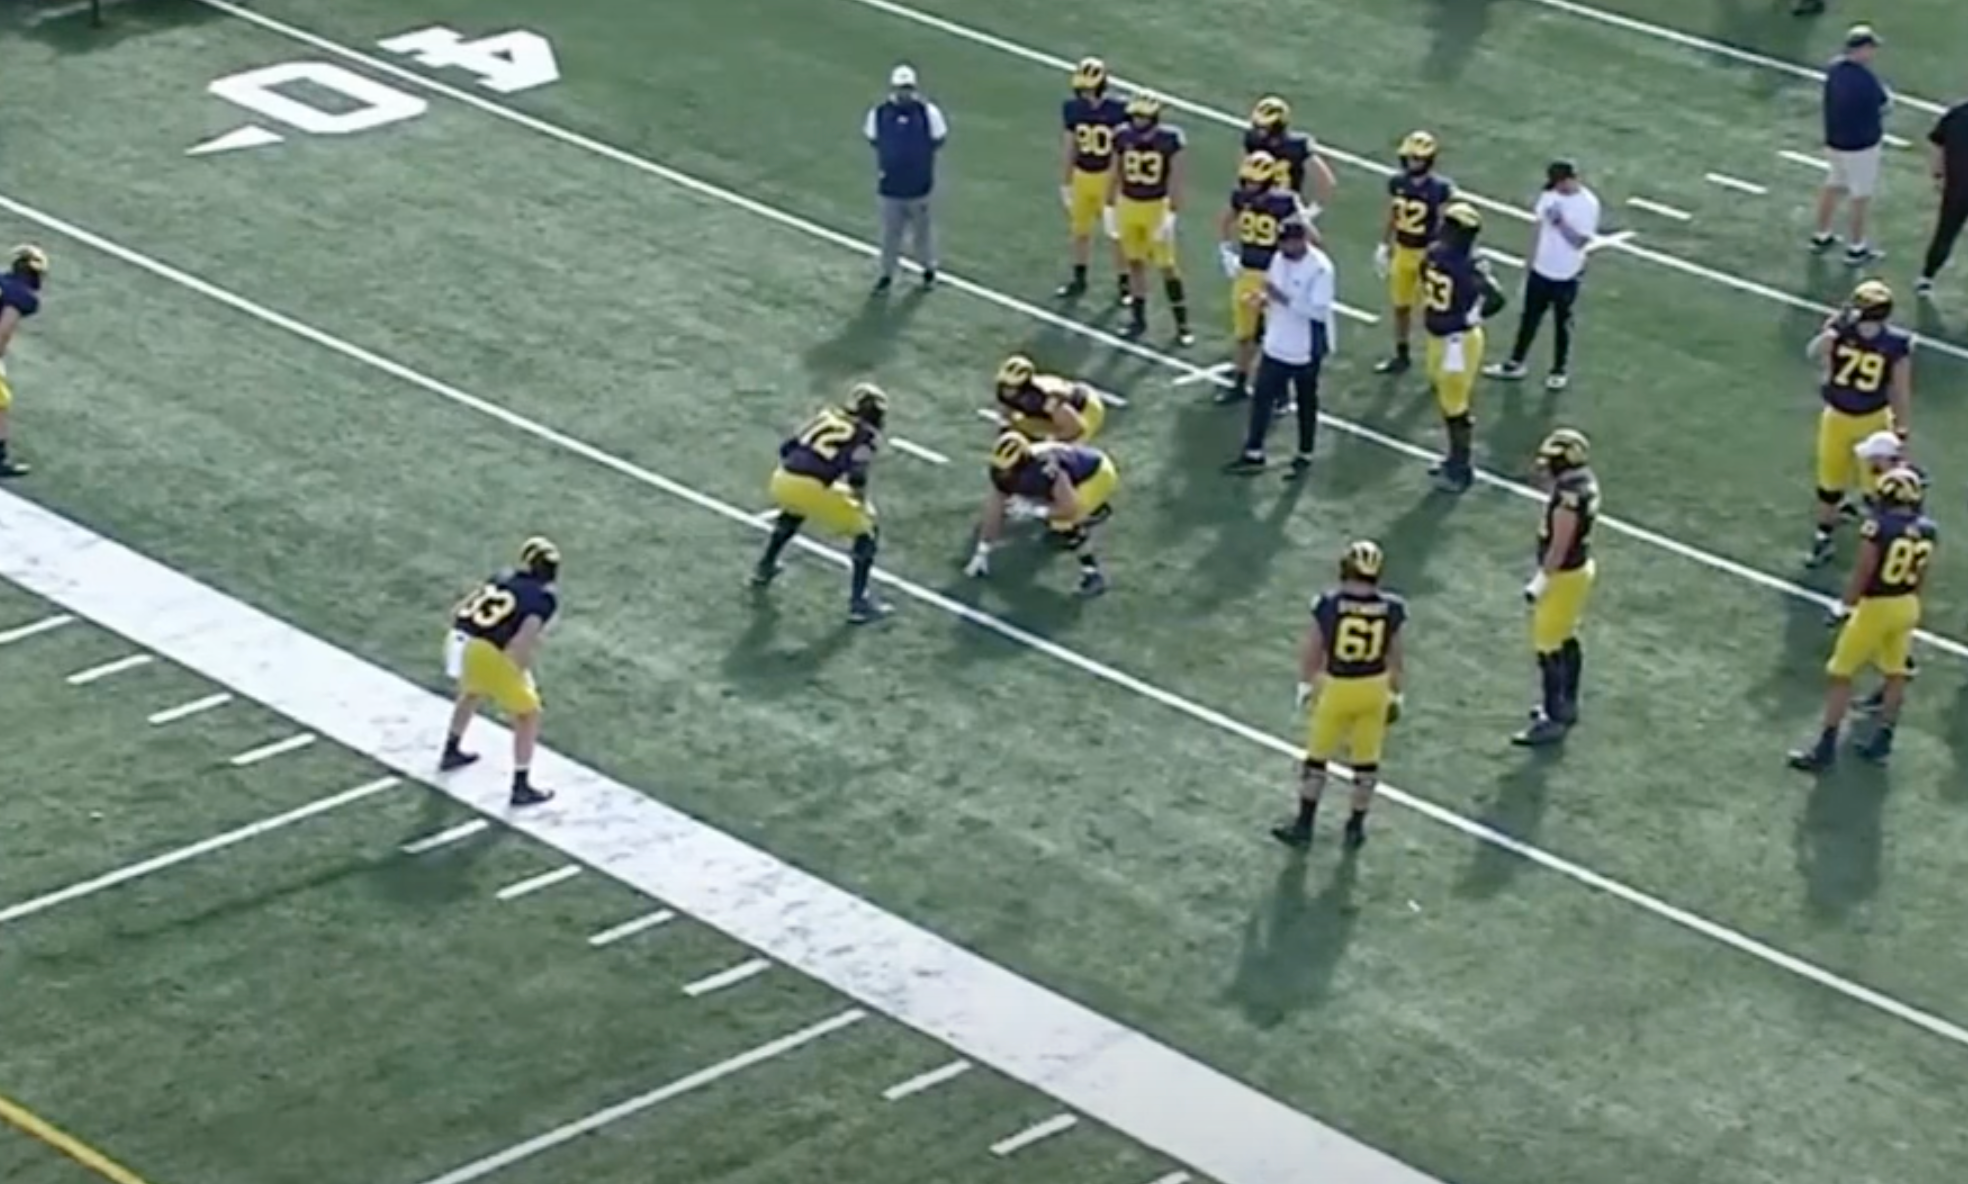 Michigan Offensive Line Drills - Michigan Off Ball Drills with Tight Ends